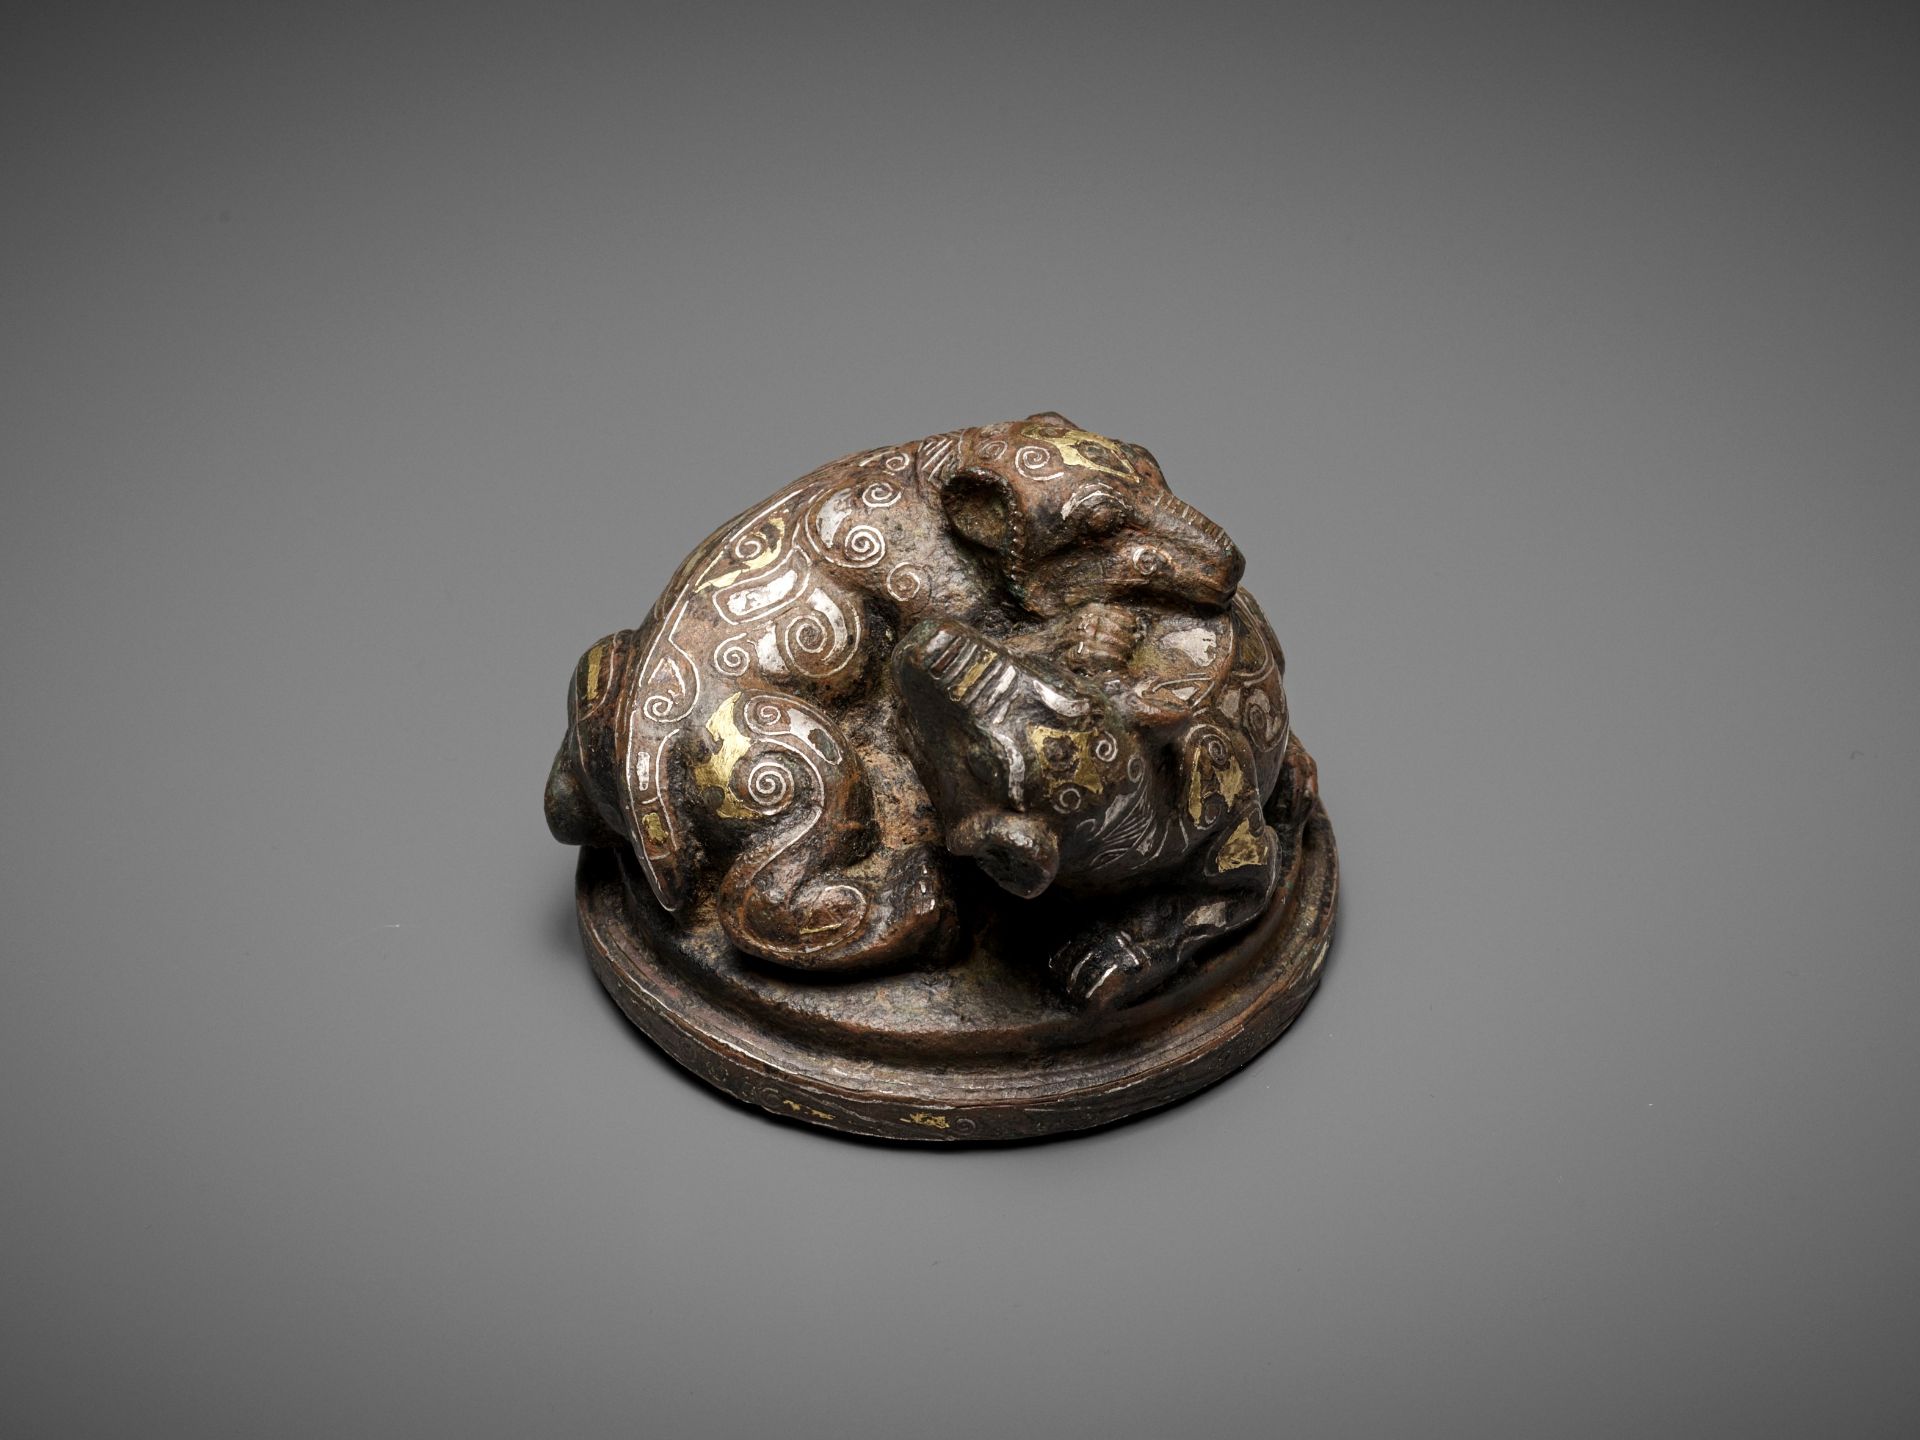 A GOLD AND SILVER-INLAID 'FIGHTING BEARS' BRONZE MAT WEIGHT, WARRING STATES TO HAN DYNASTY - Image 11 of 12